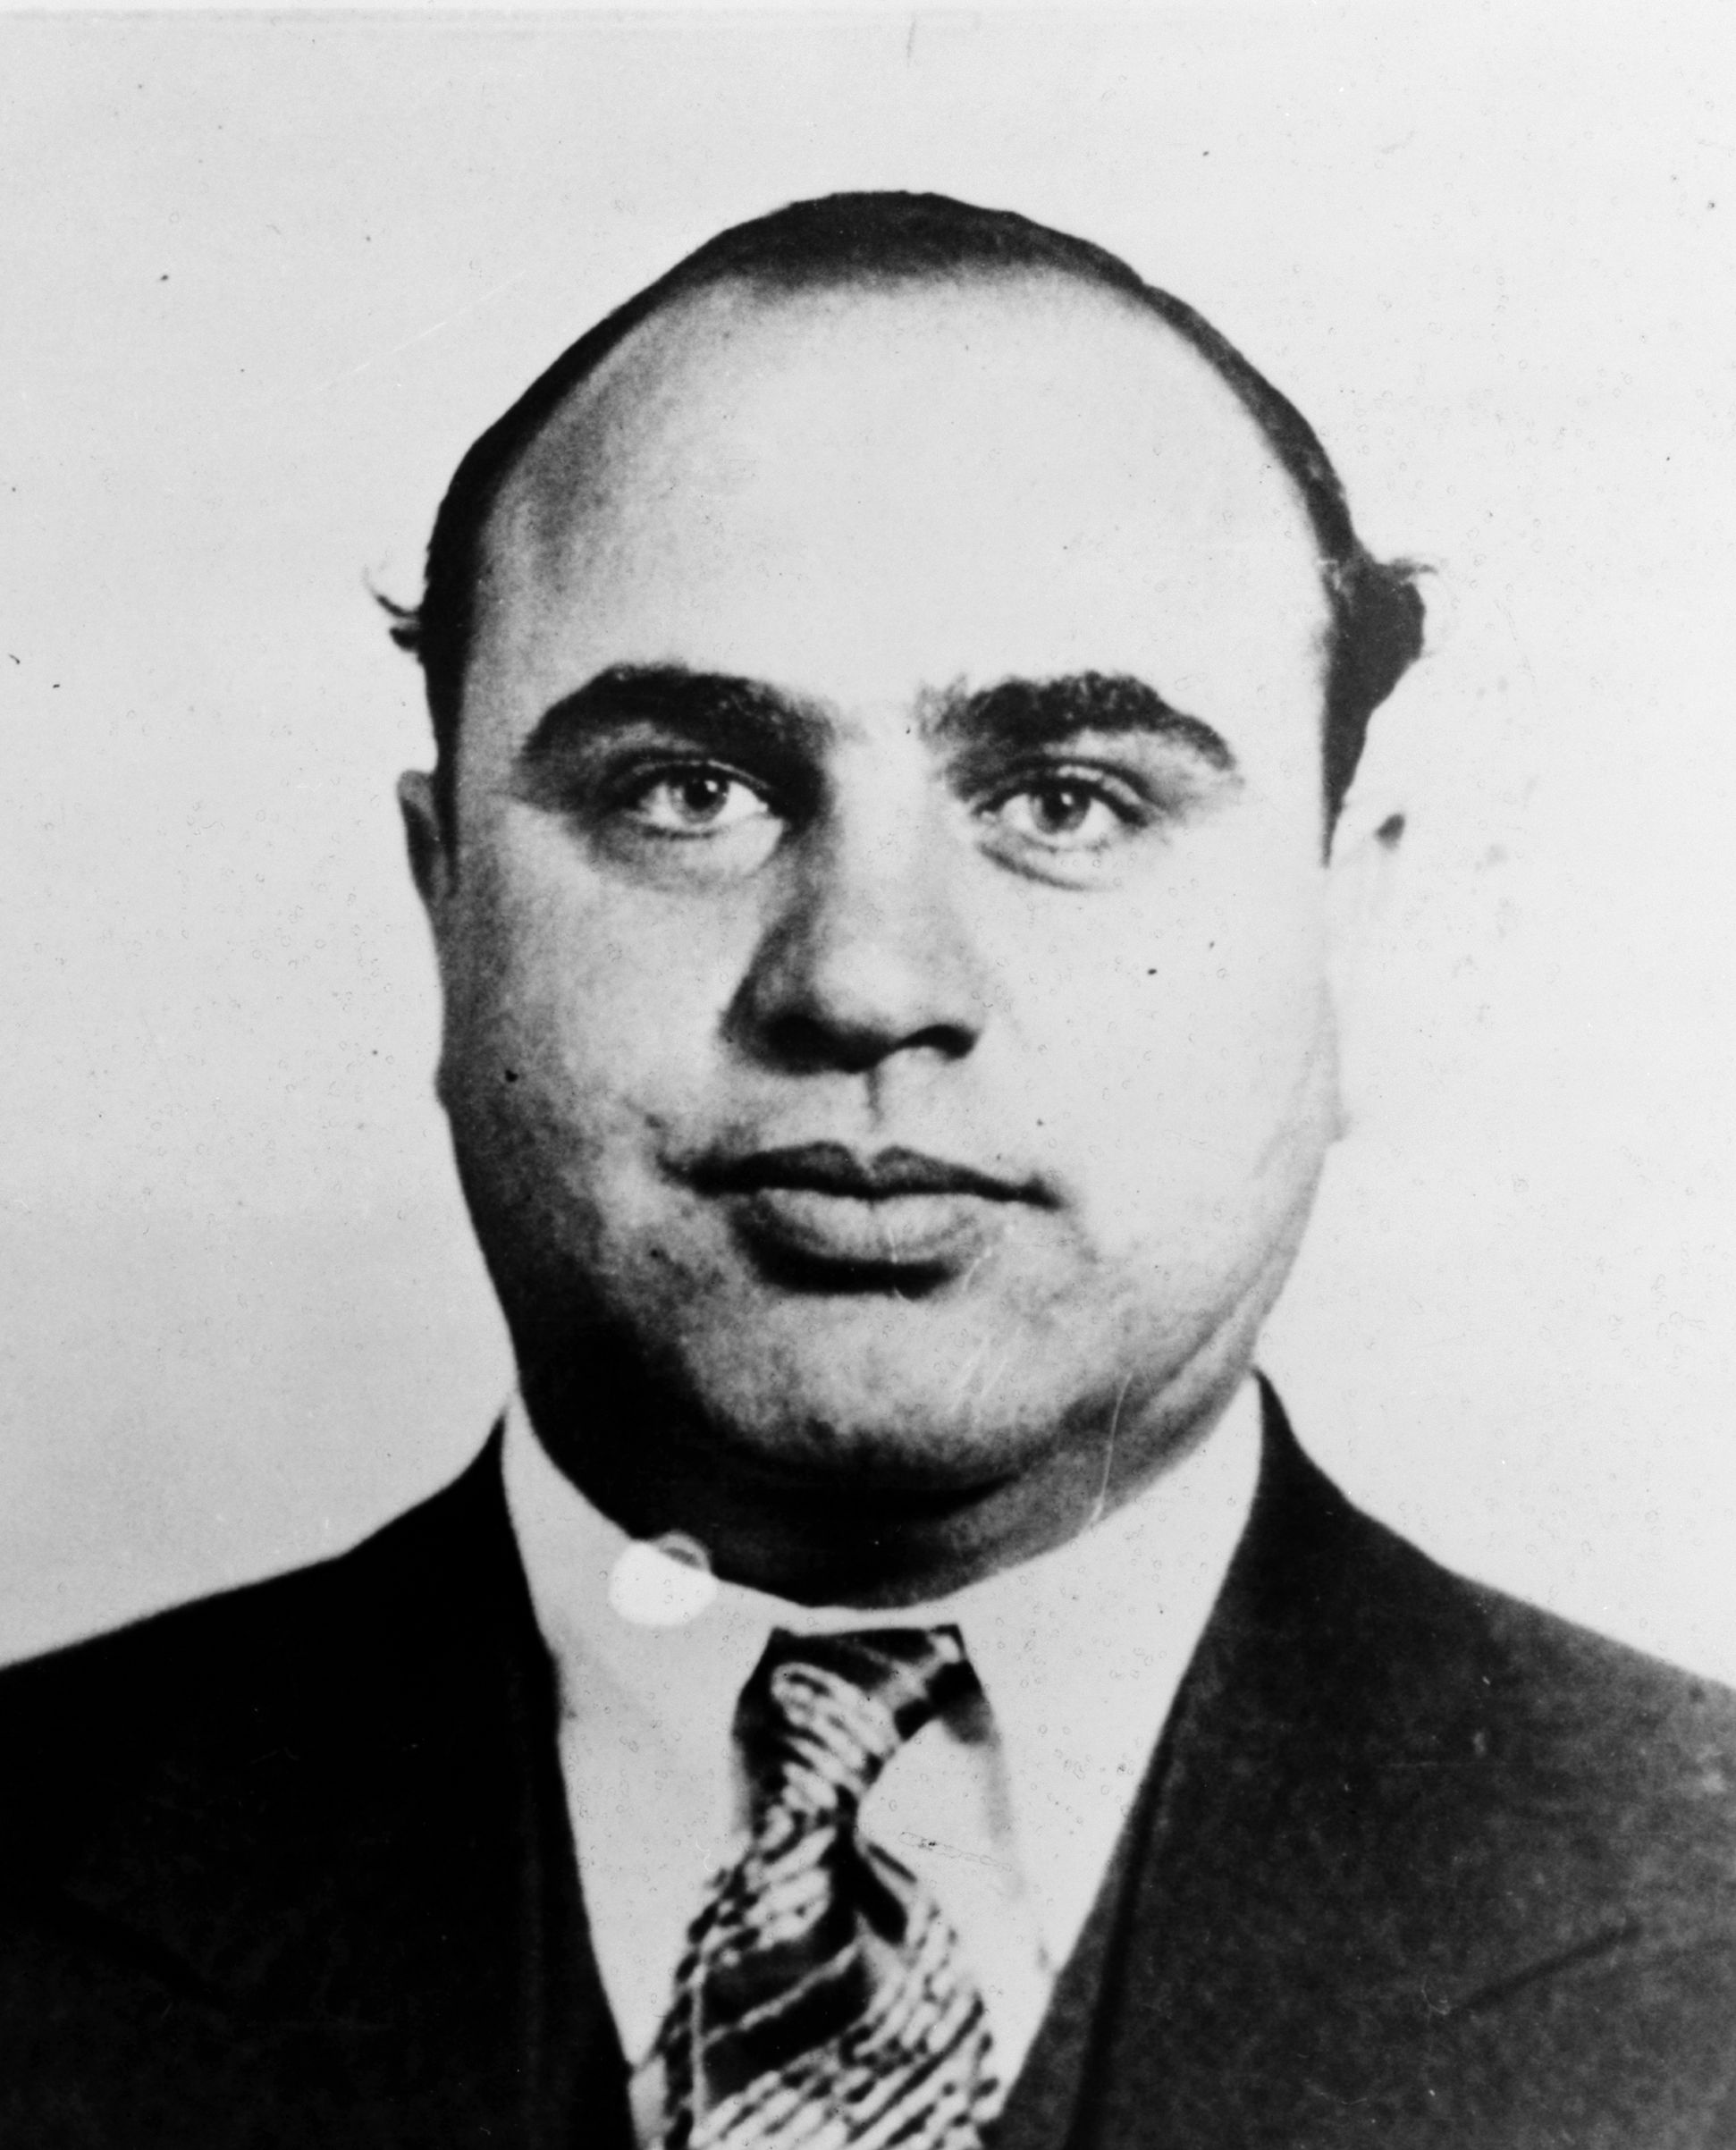 A black and white mug shot of famous gangster Al Capone